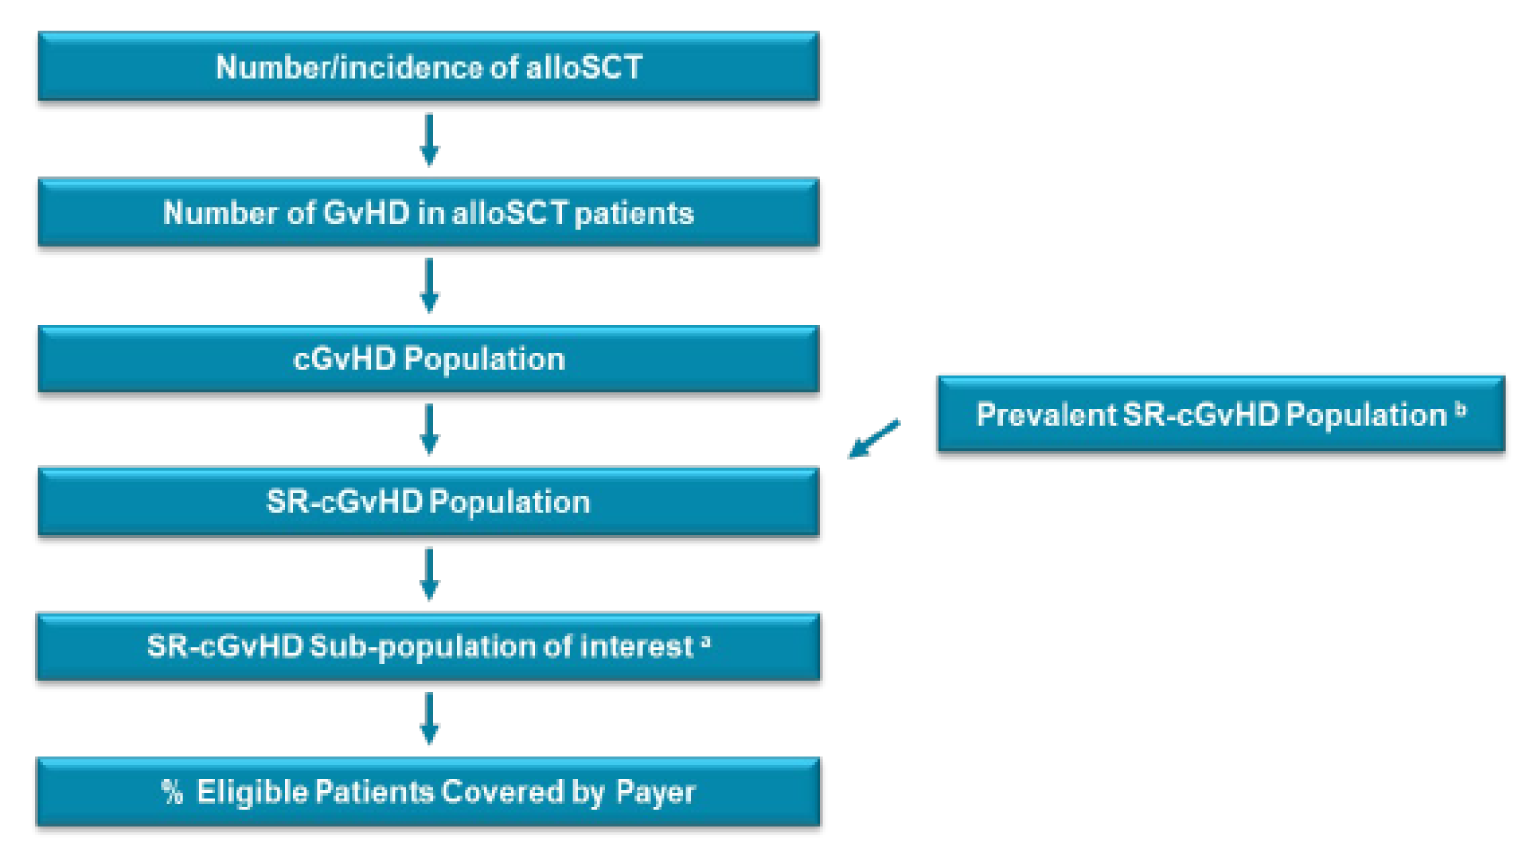 Flow chart outlining the steps taken to calculate the proportion of patients eligible for treatment. This starts with the incidence of alloSCT, the cGvHD population, those who have steroid-resistant cGvHD (incident and prevalent), and finally the percentage covered by payers.